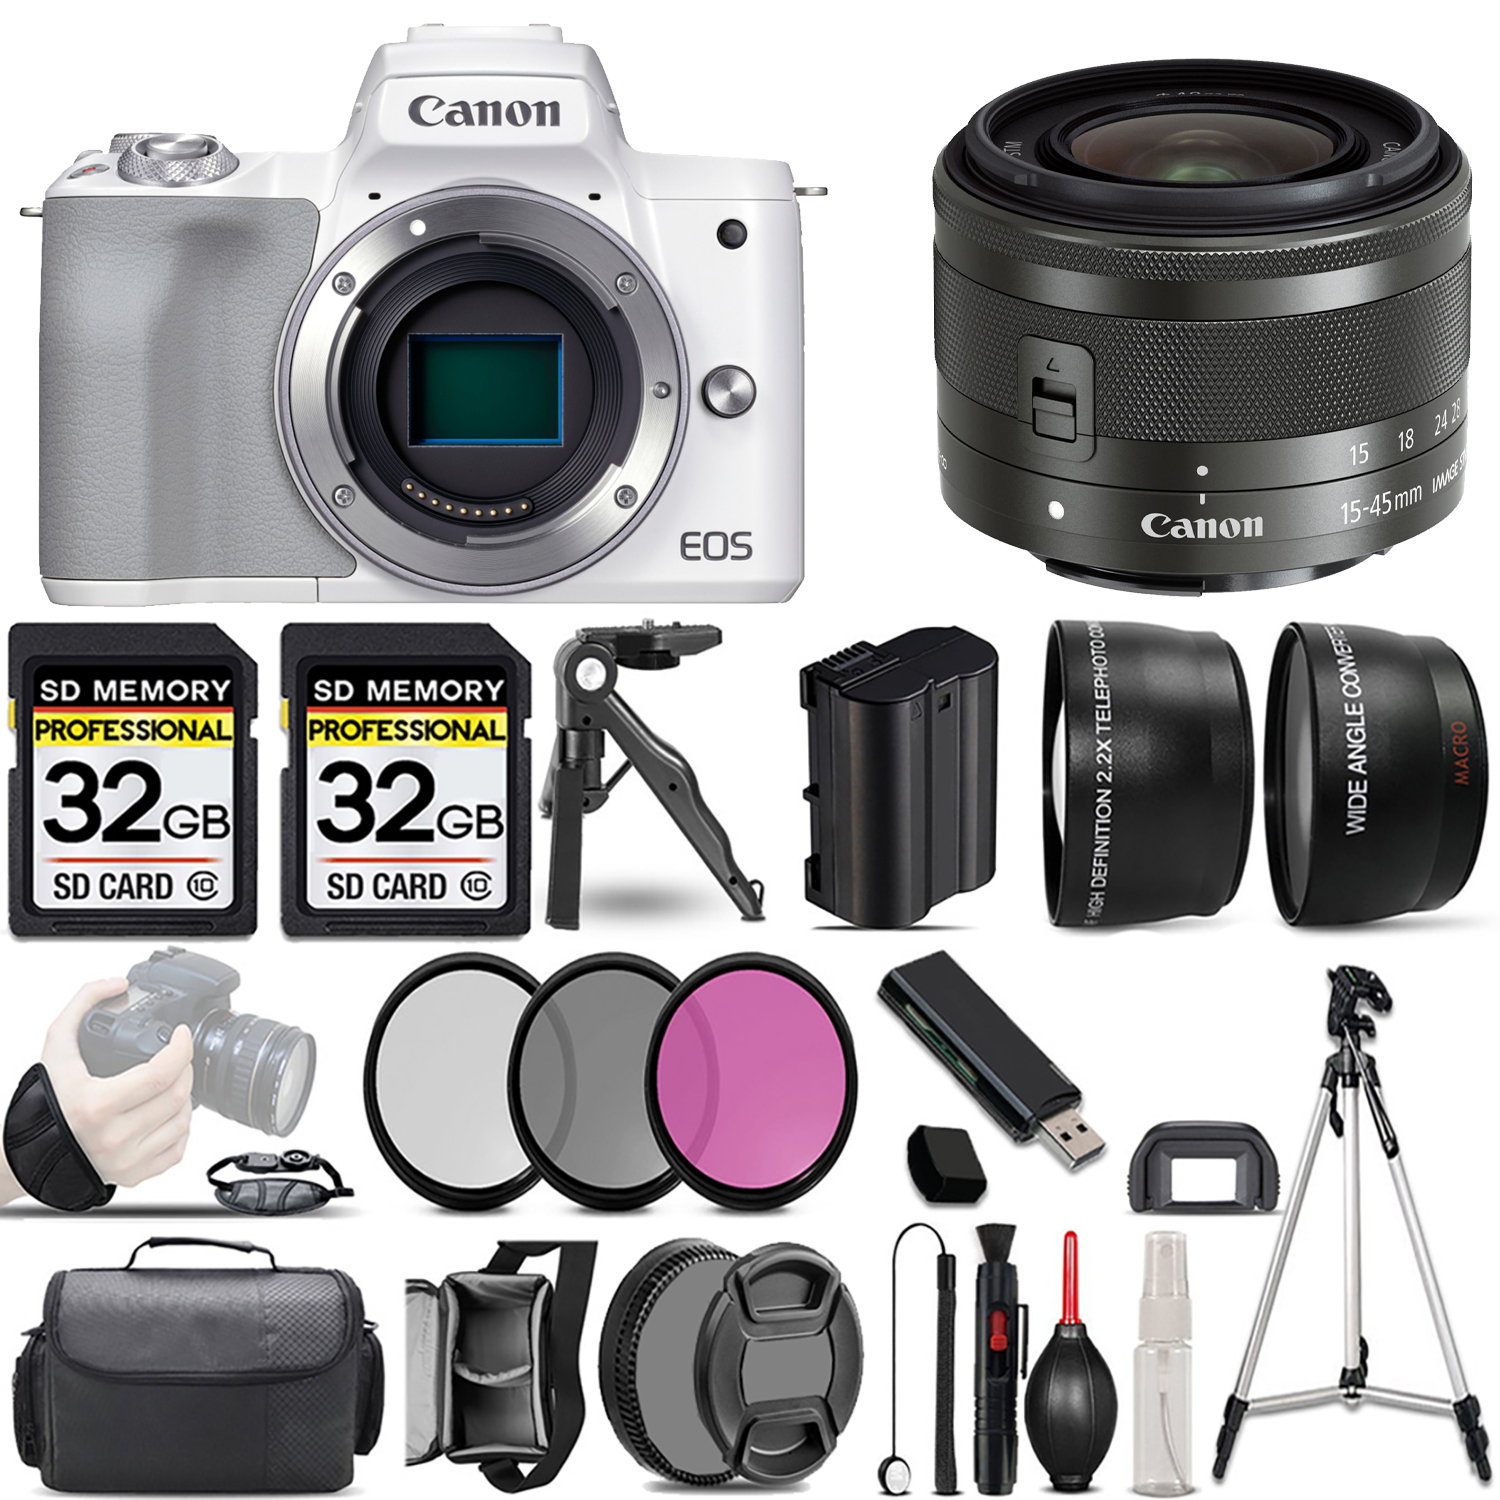 EOS M50 Mark II (White) + 15-45mm IS STM Lens (Graphite) + 3 Piece Filter Set + 64GB *FREE SHIPPING*